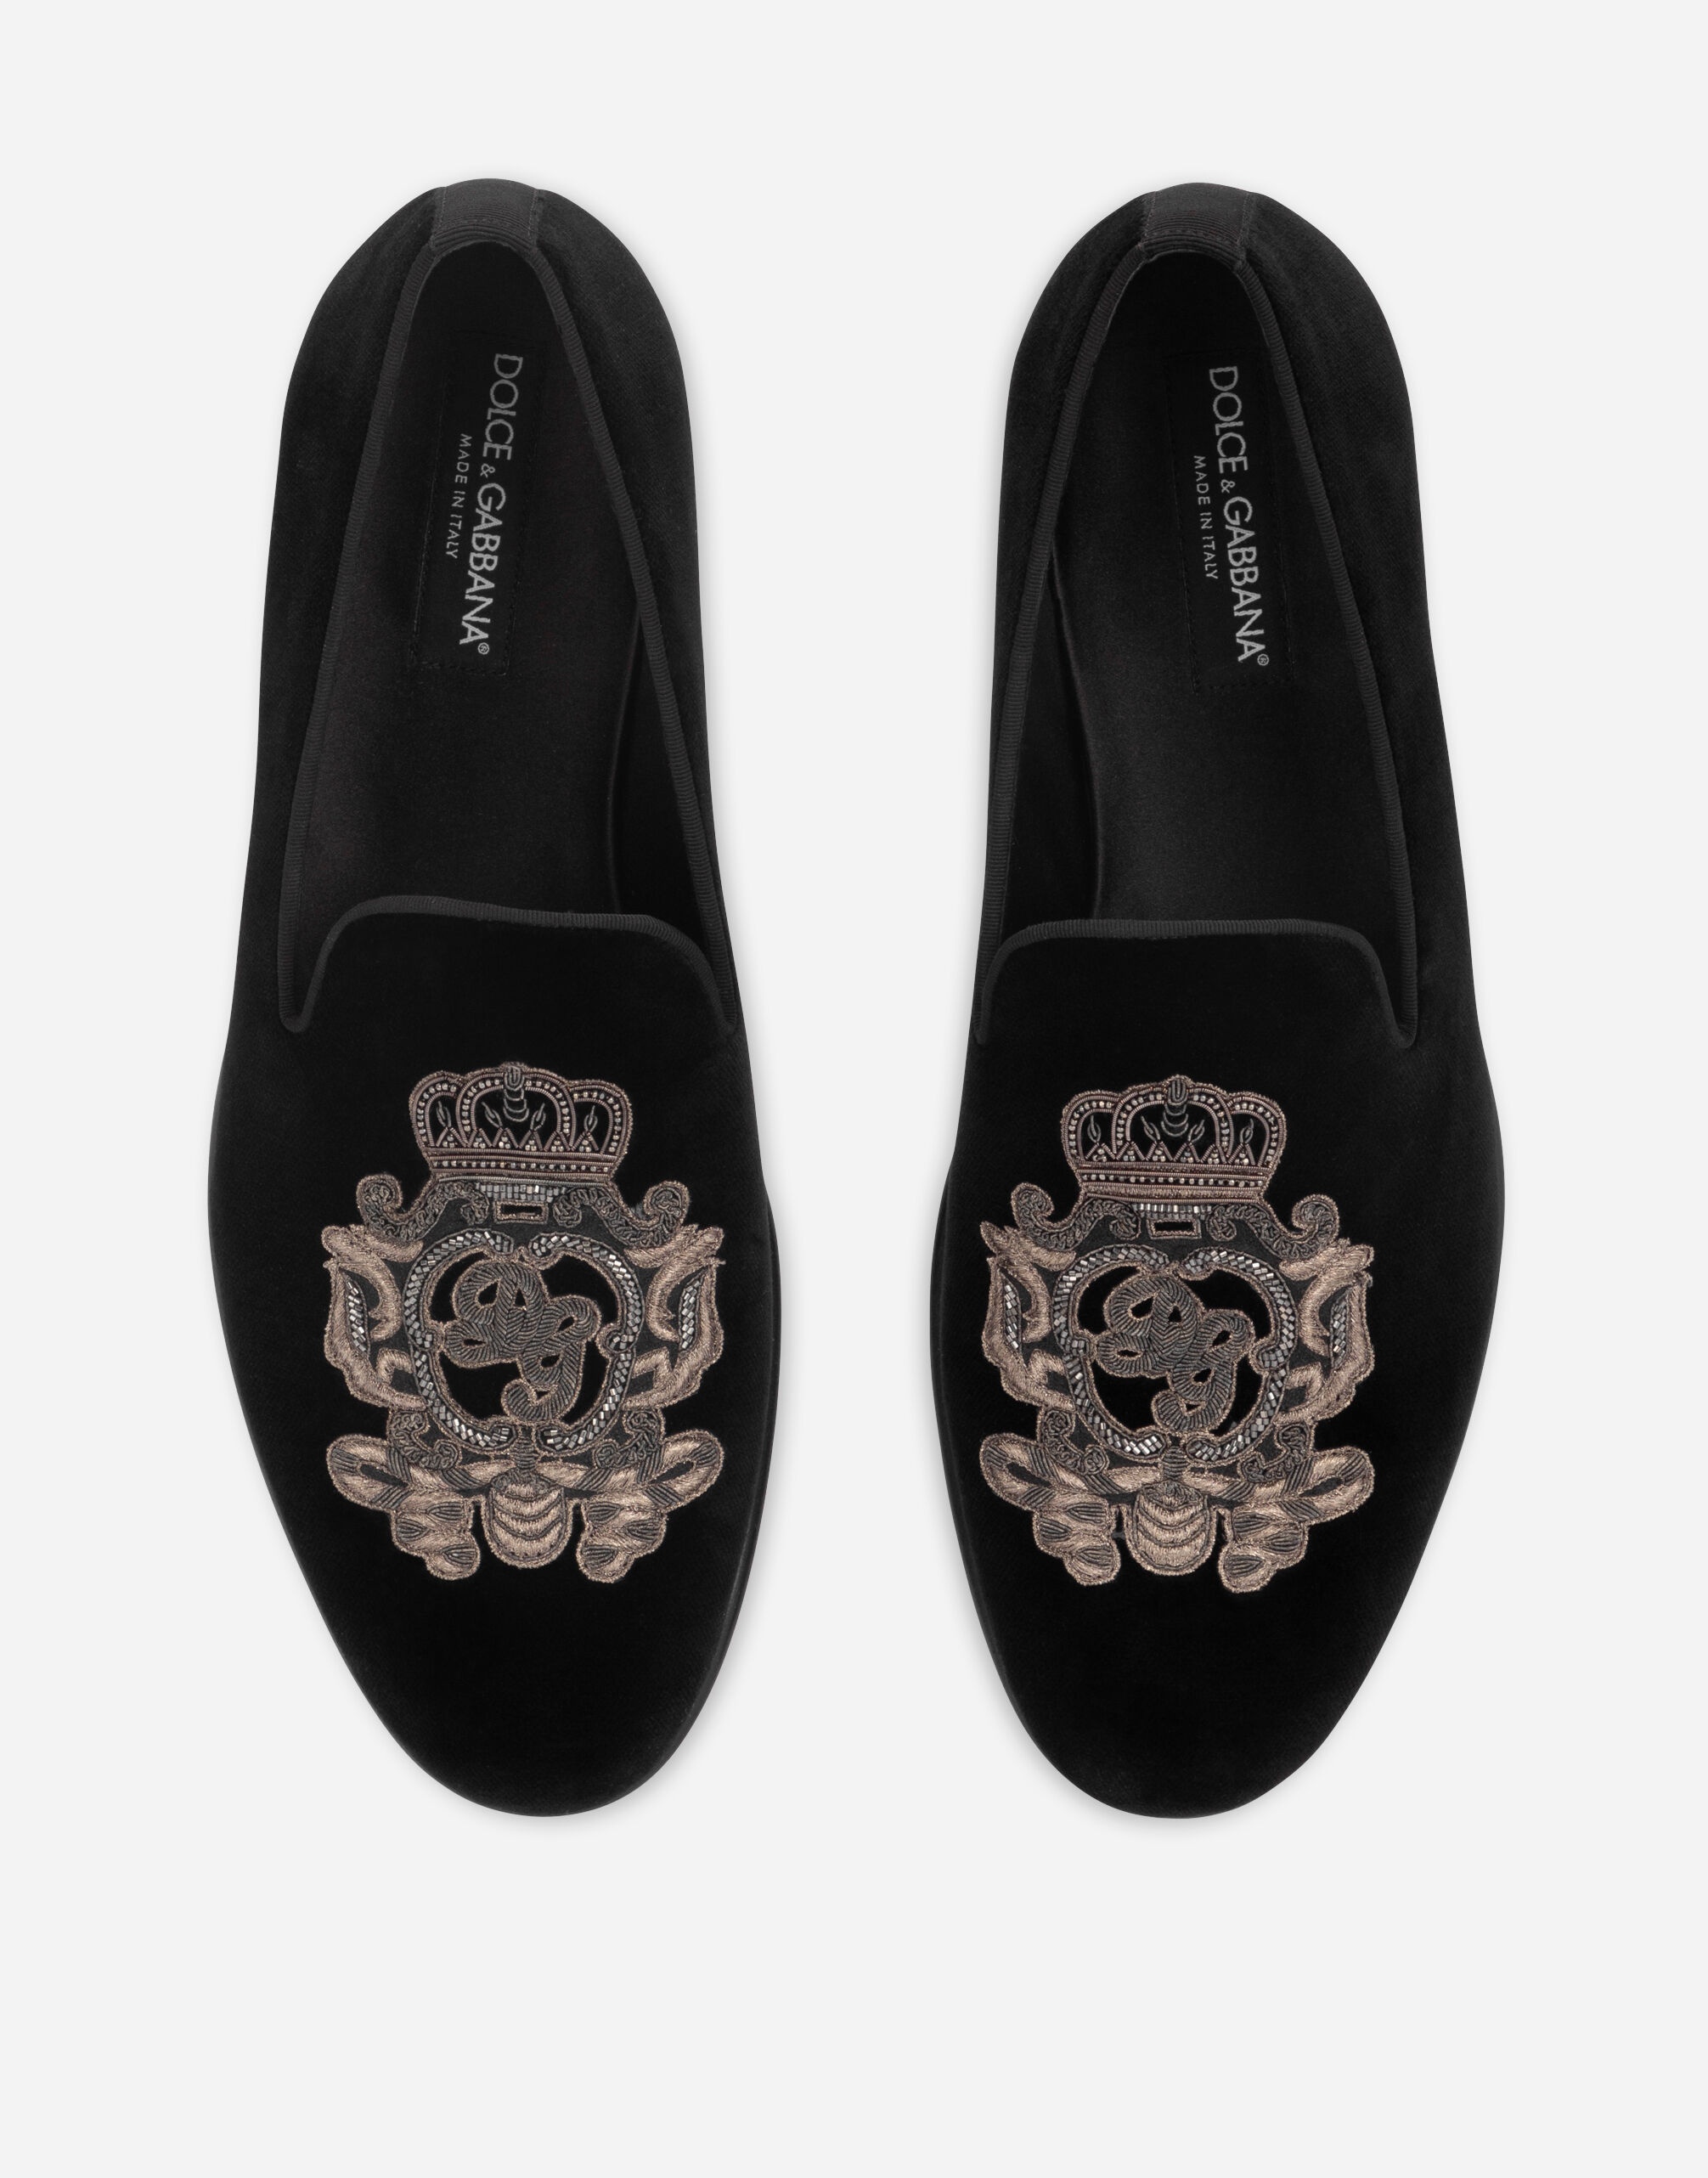 Velvet slippers with coat of arms embroidery - 4